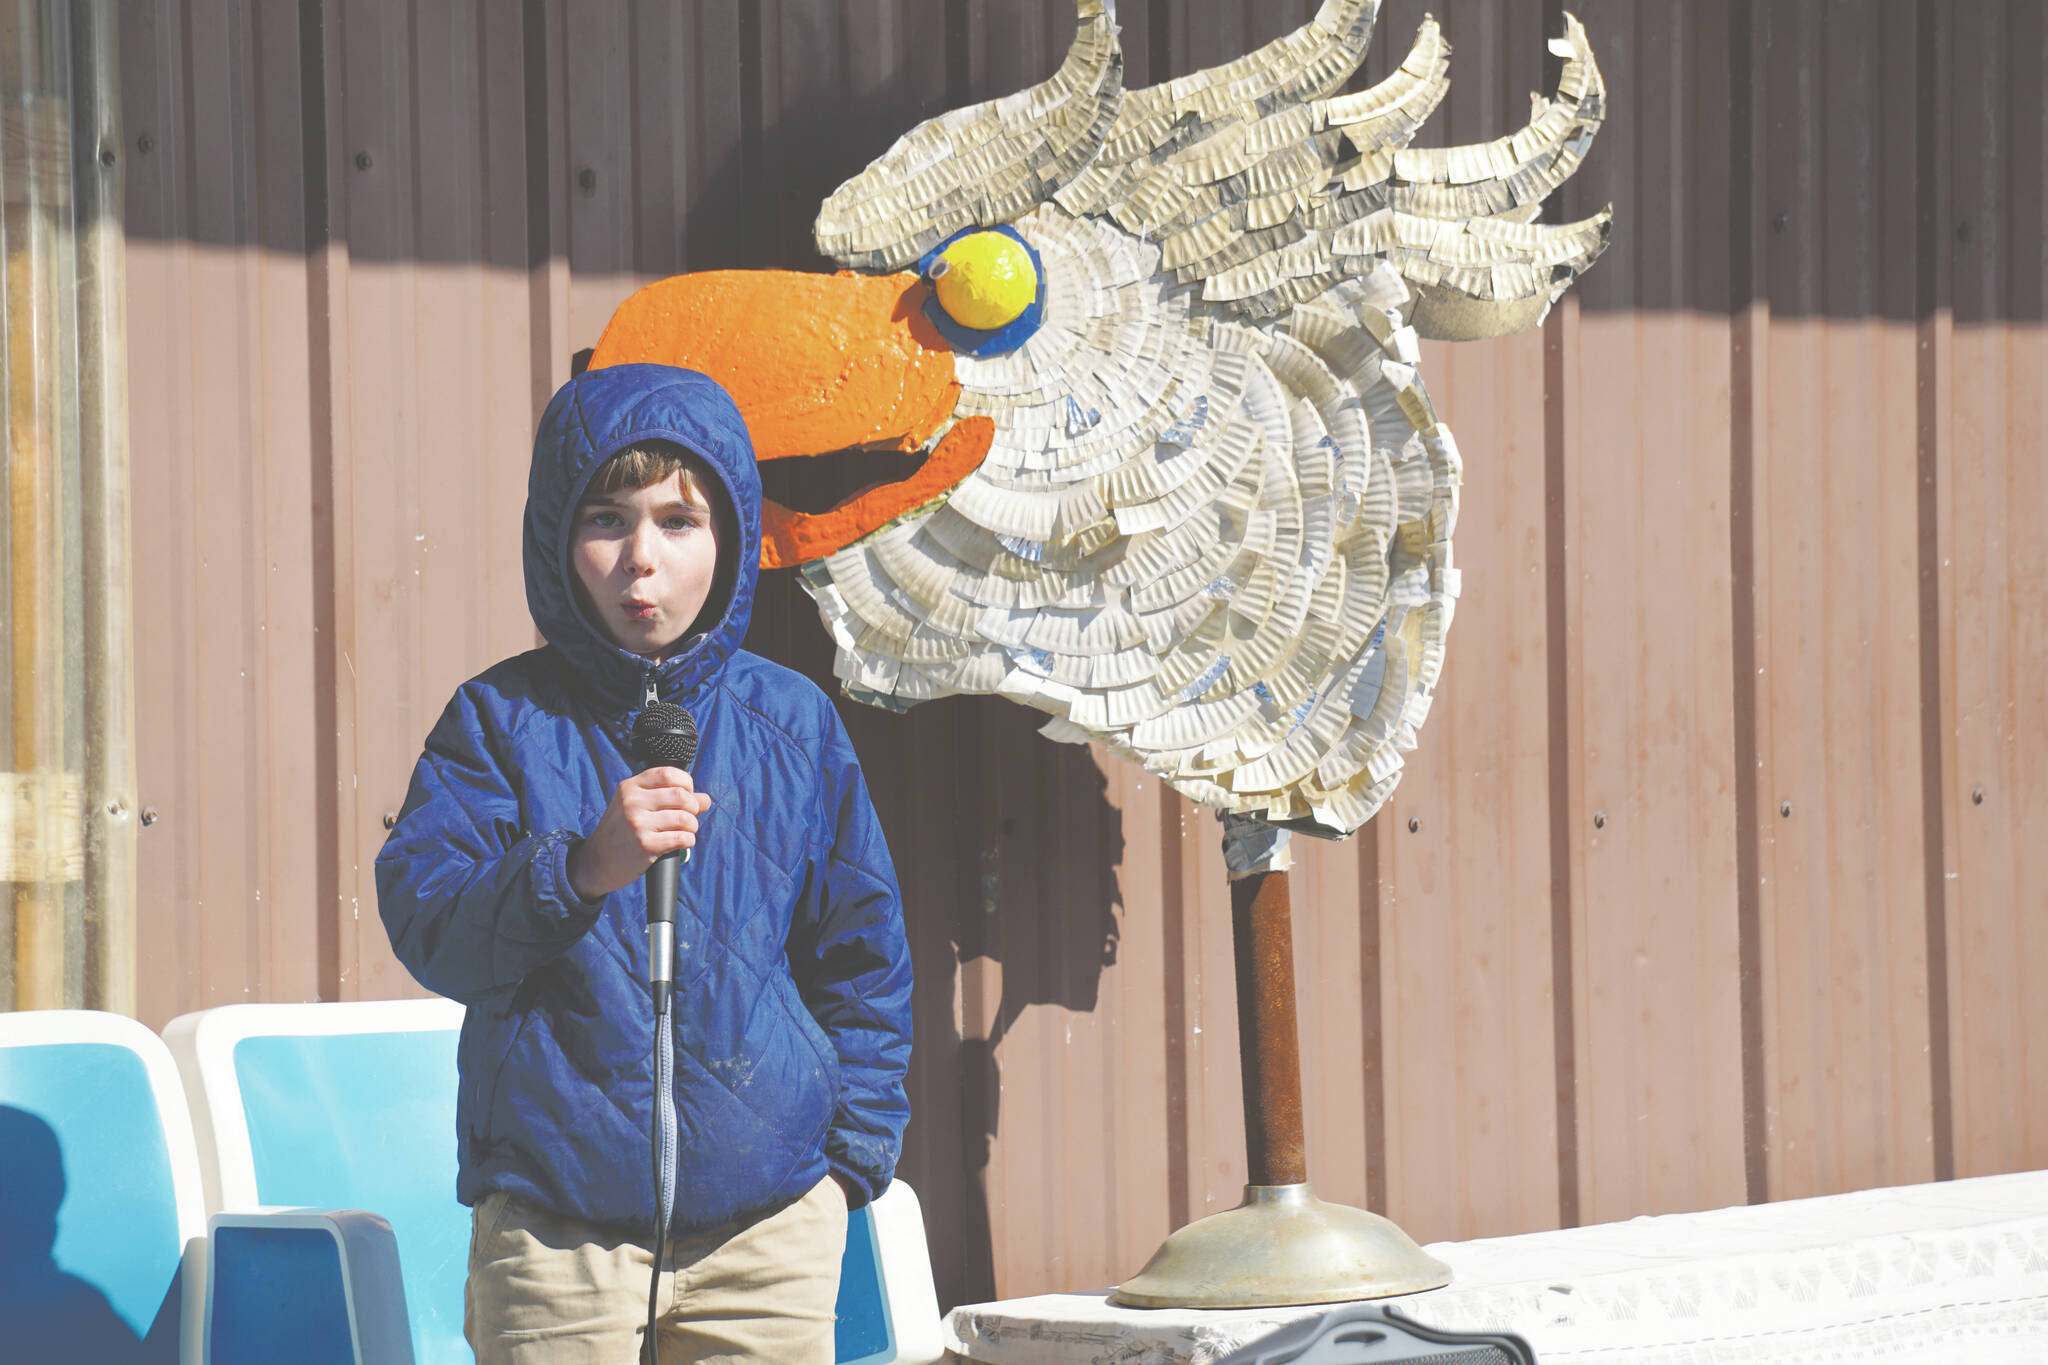 Eli Springer of Fairbanks does his impression of an eagle call for the Homer Brewing Company’s bird calling contest during the Kachemak Bay Shorebird Festival on Saturday, May 7, 2022, in Homer, Alaska. The winner of the serious bird call contest was Cohen McBride of Homer, with his eagle call. (Photo by Michael Armstrong/Homer News)